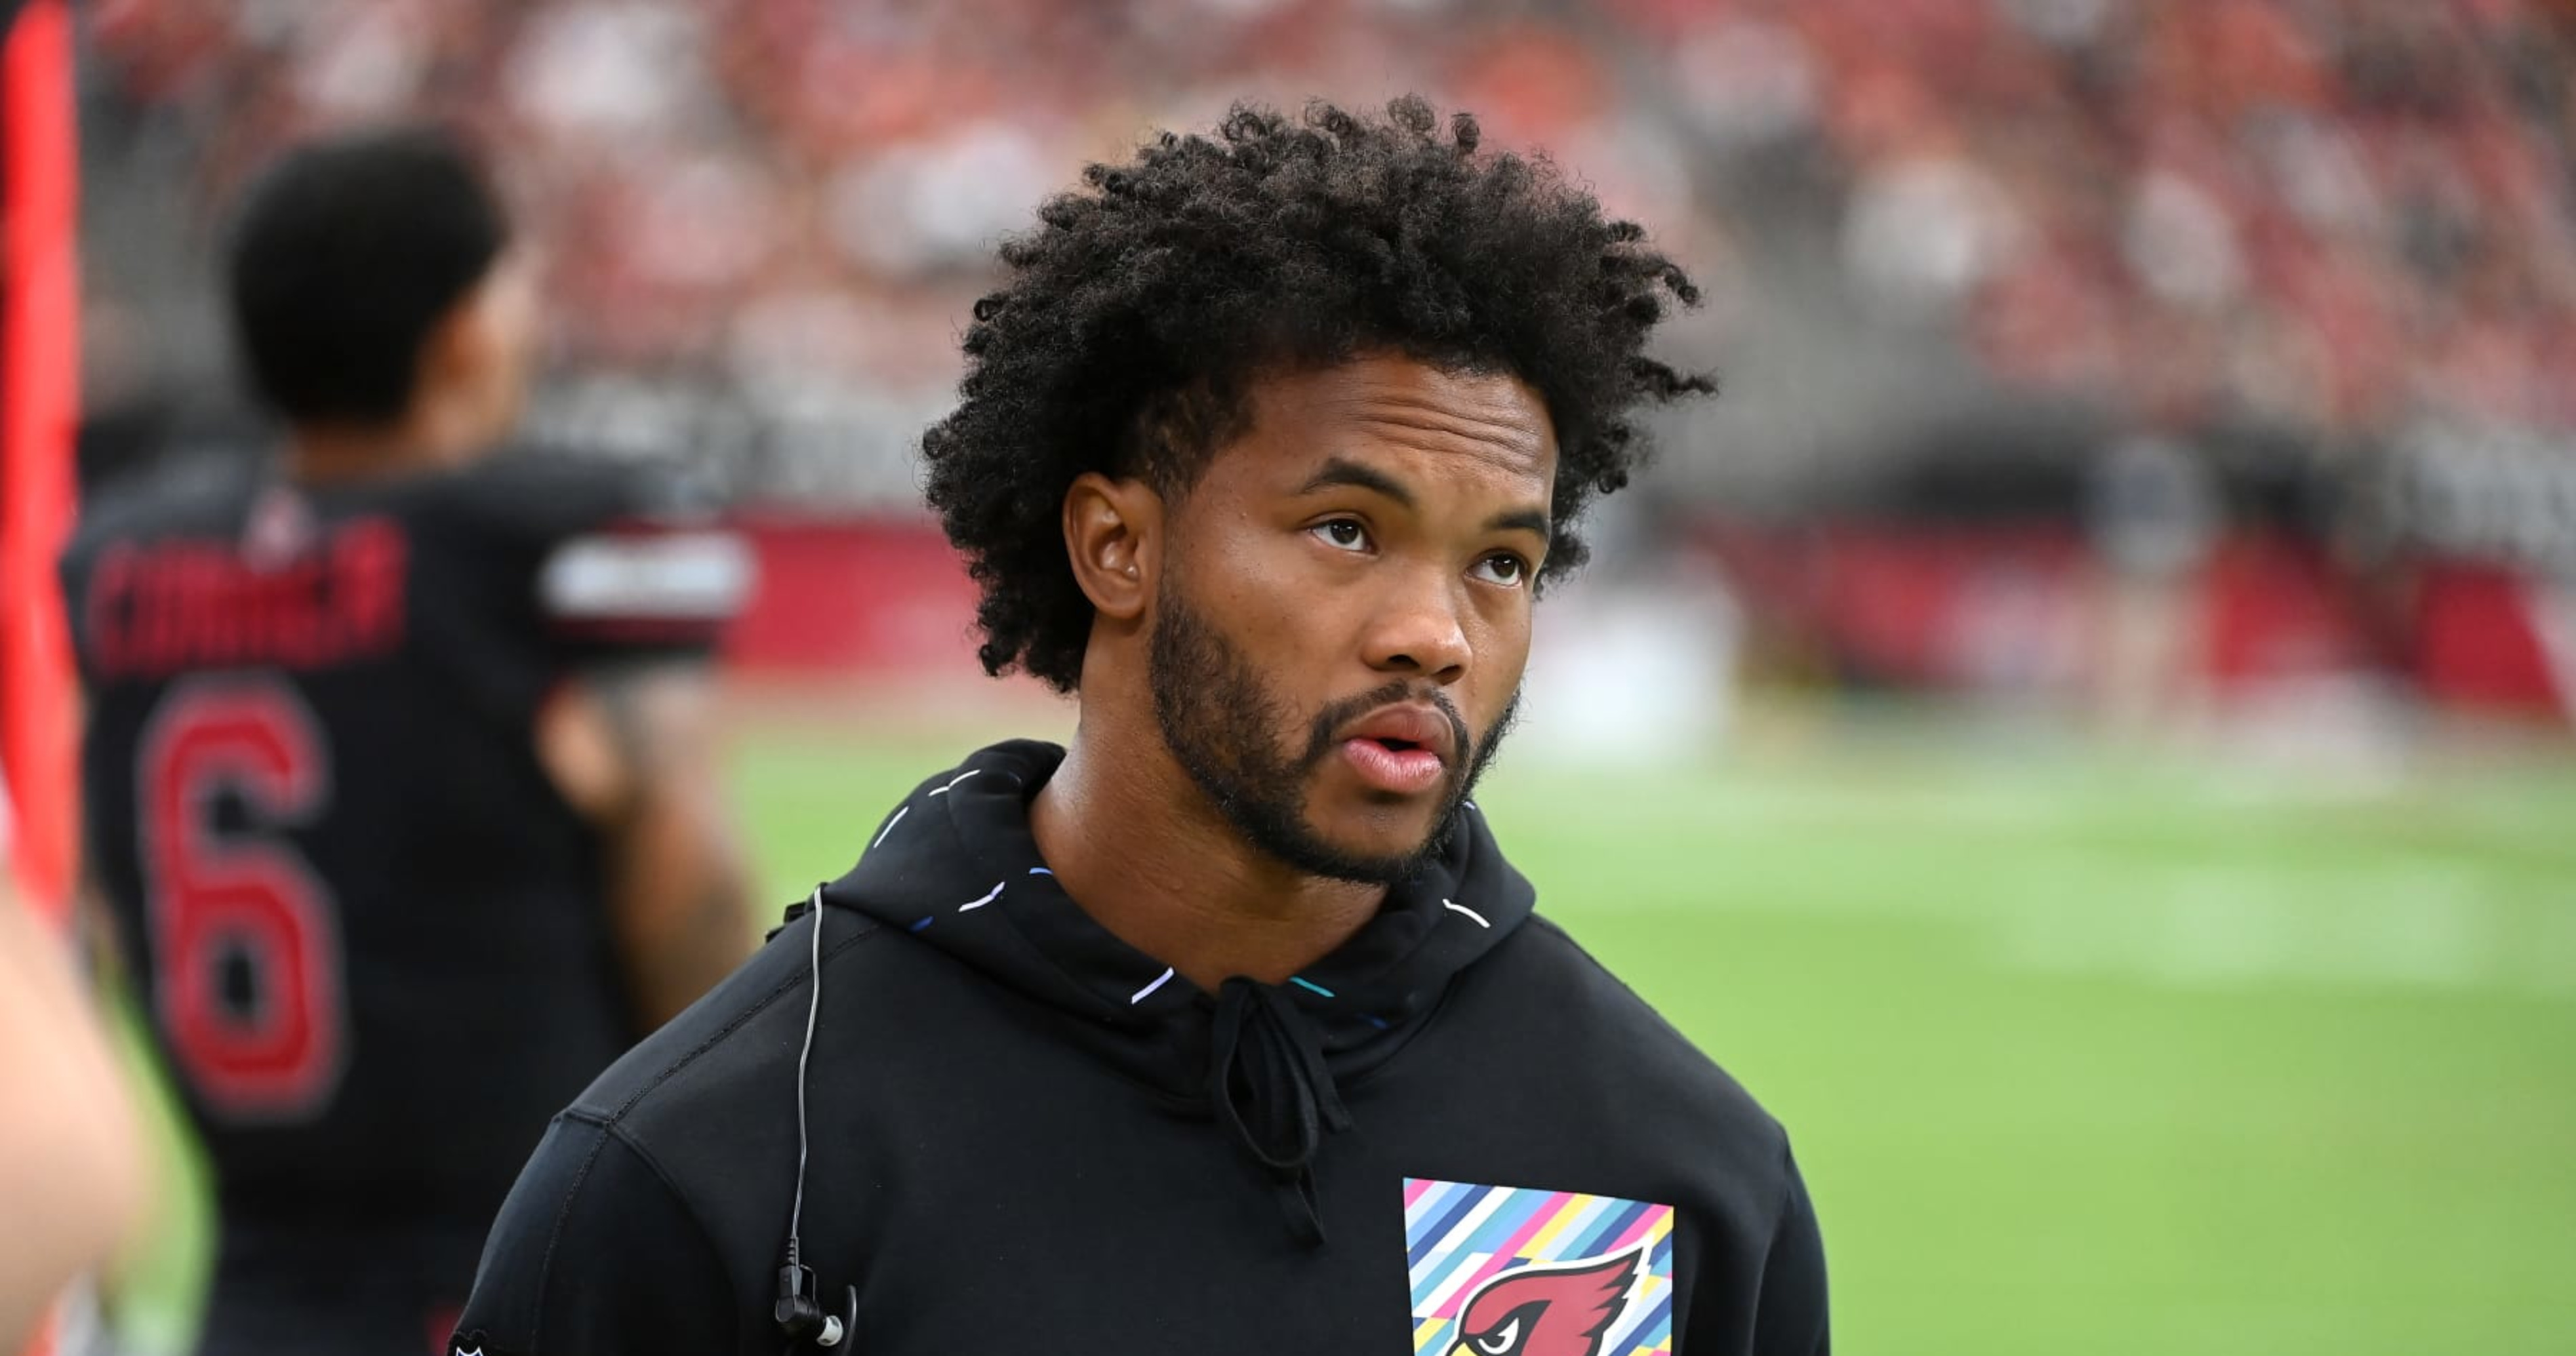 Kyler Murray says his knee rehab is going well, but has no